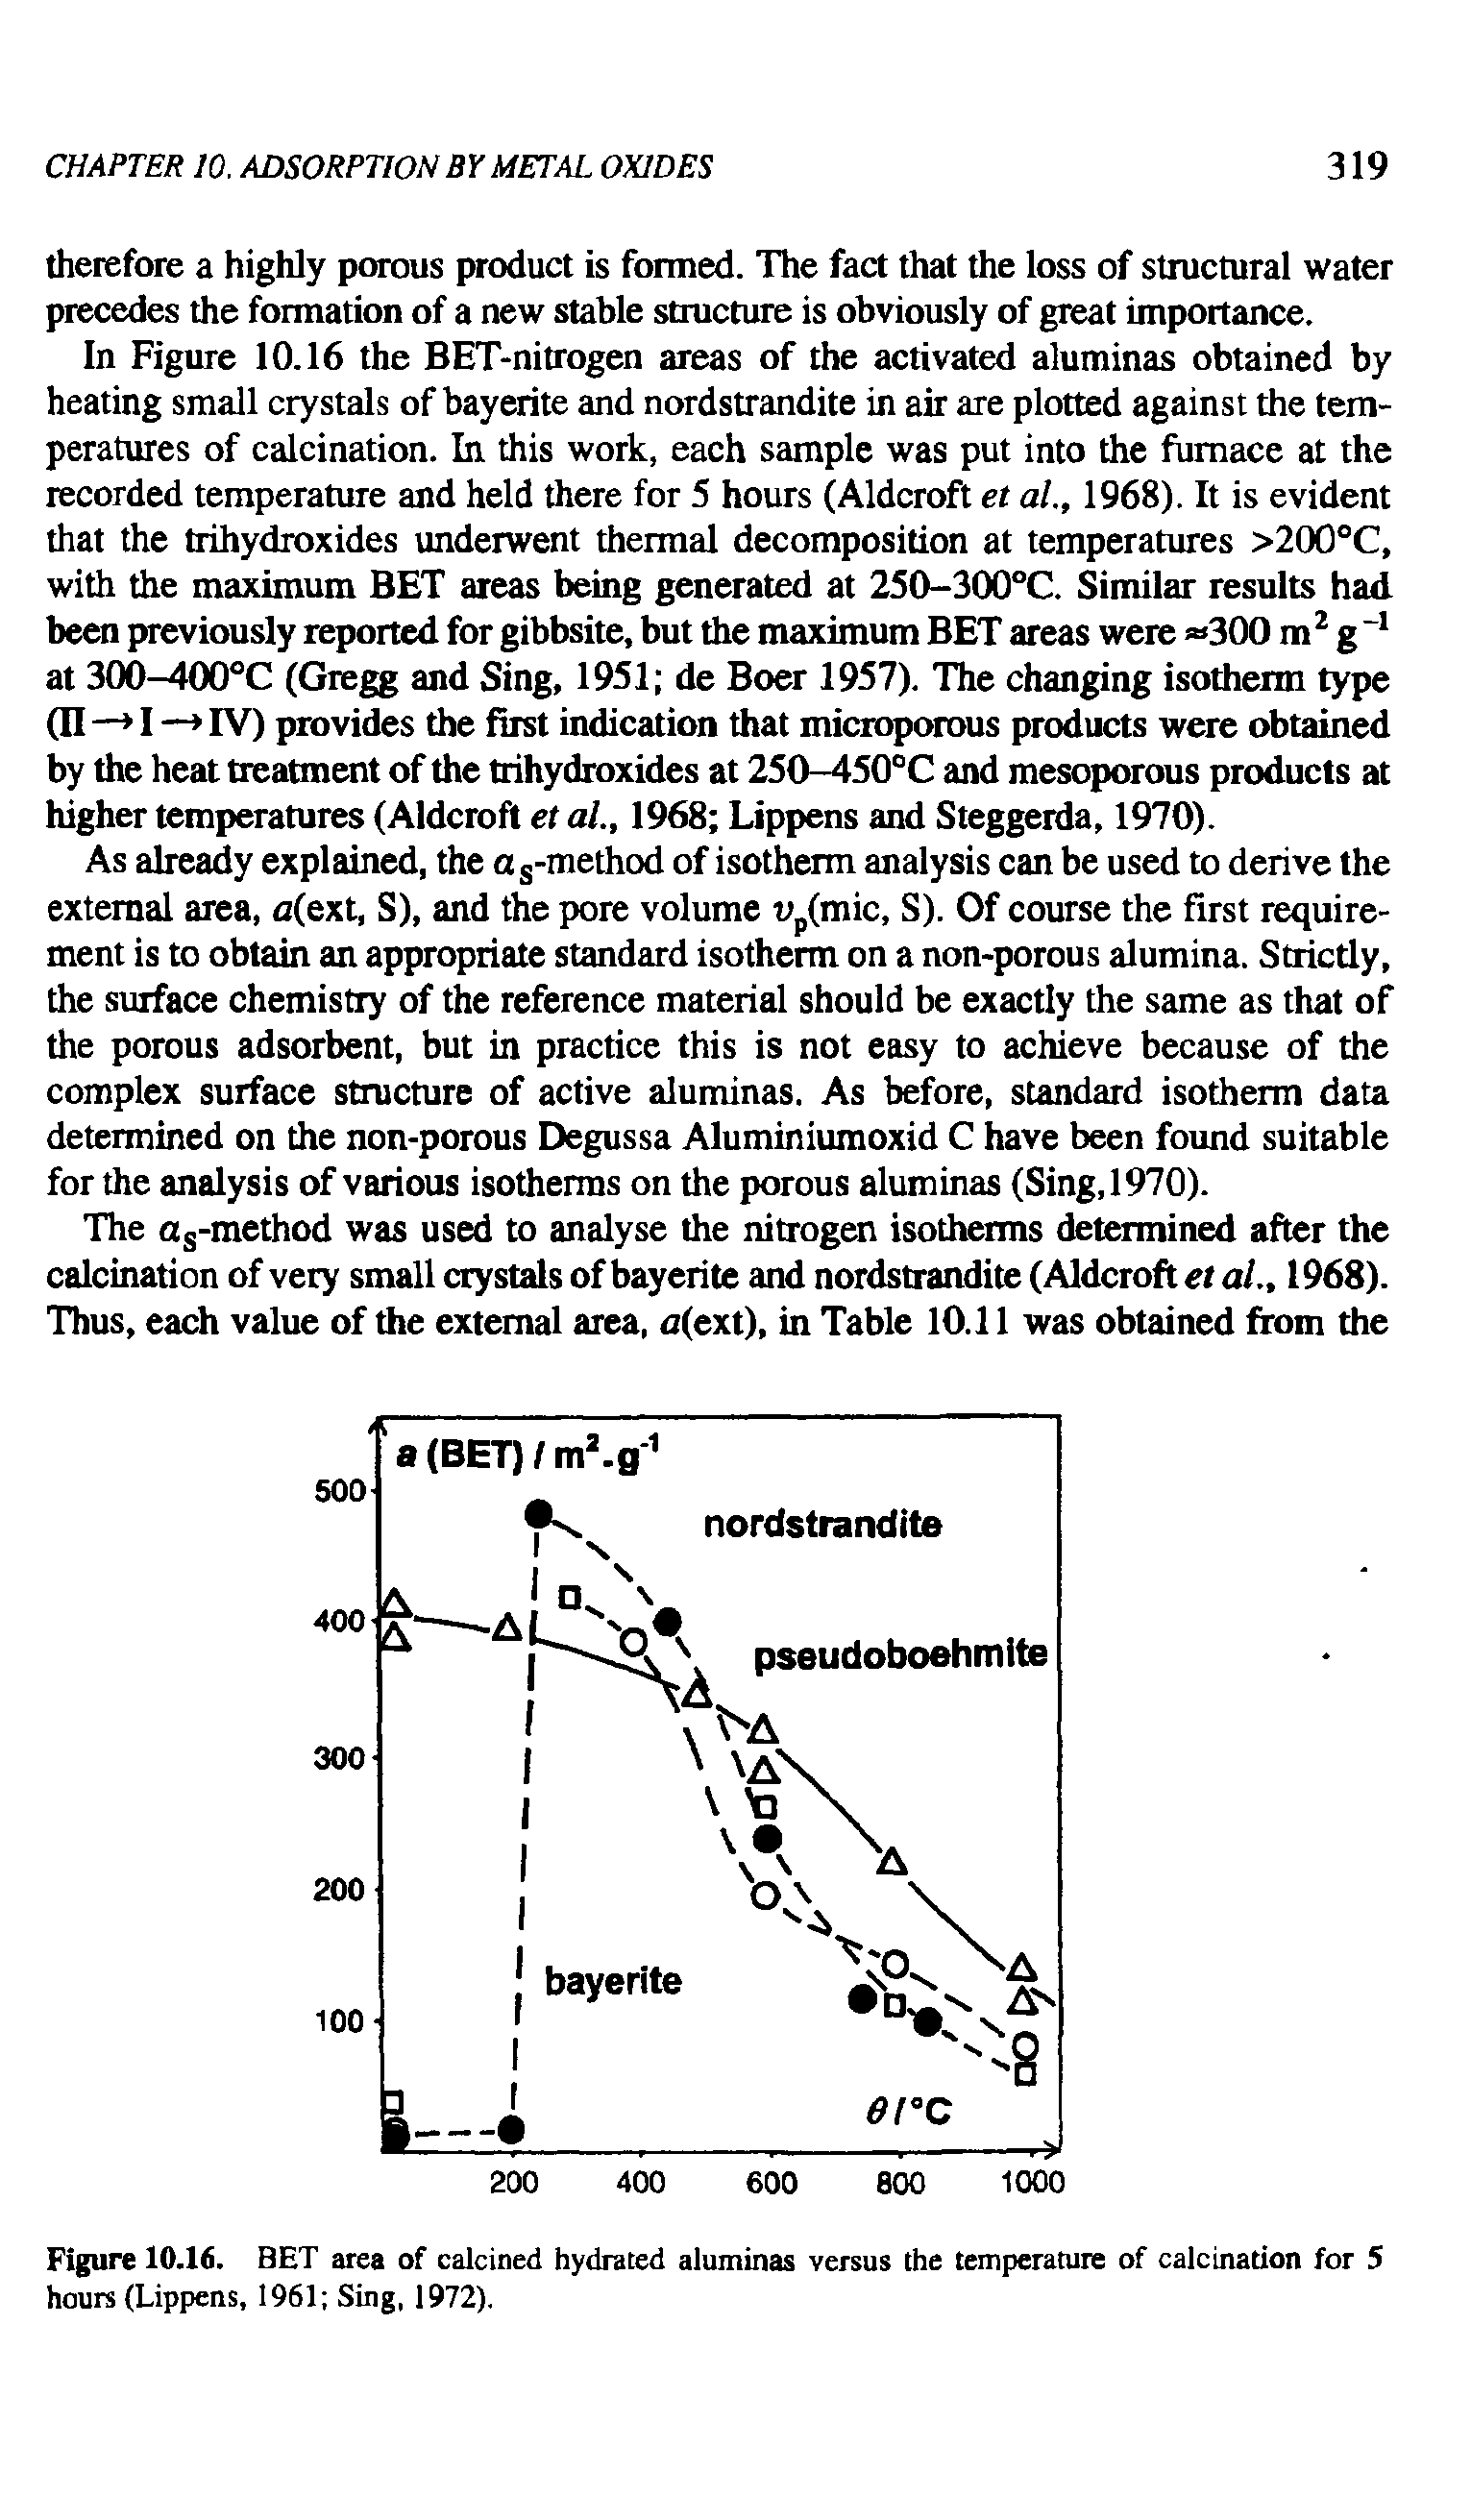 Figure 10.16. BET area of calcined hydrated aluminas versus the temperature of calcination for 5 hours (Lippens, 1961 Sing, 1972).